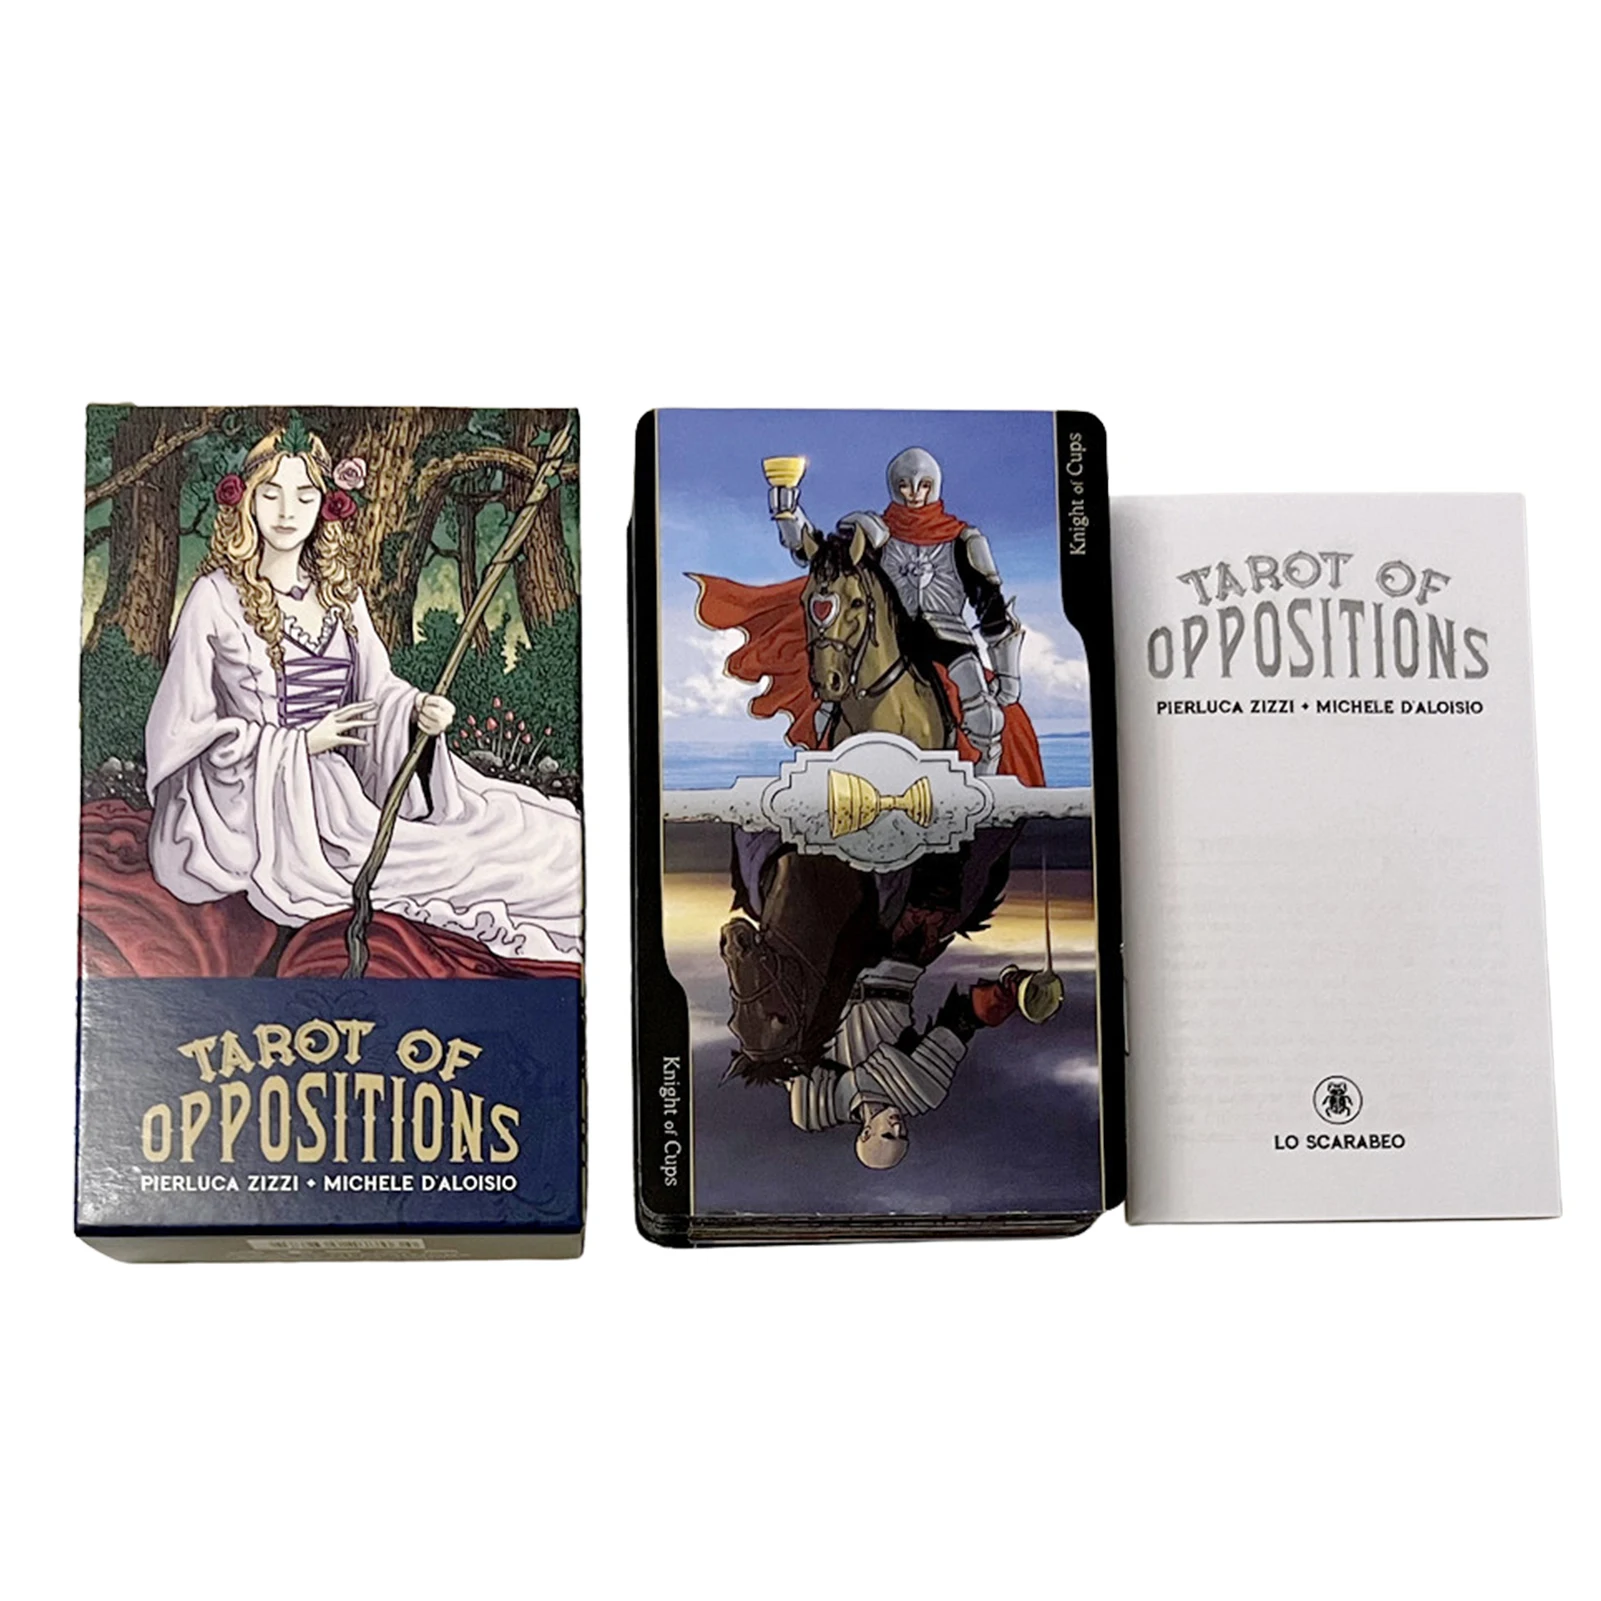 2022 NEW 12*7 Cm Tarot Of Oppositions Tarot Card With Instruction Booklet Card Family Entertainment Kids Toy 78 Card English